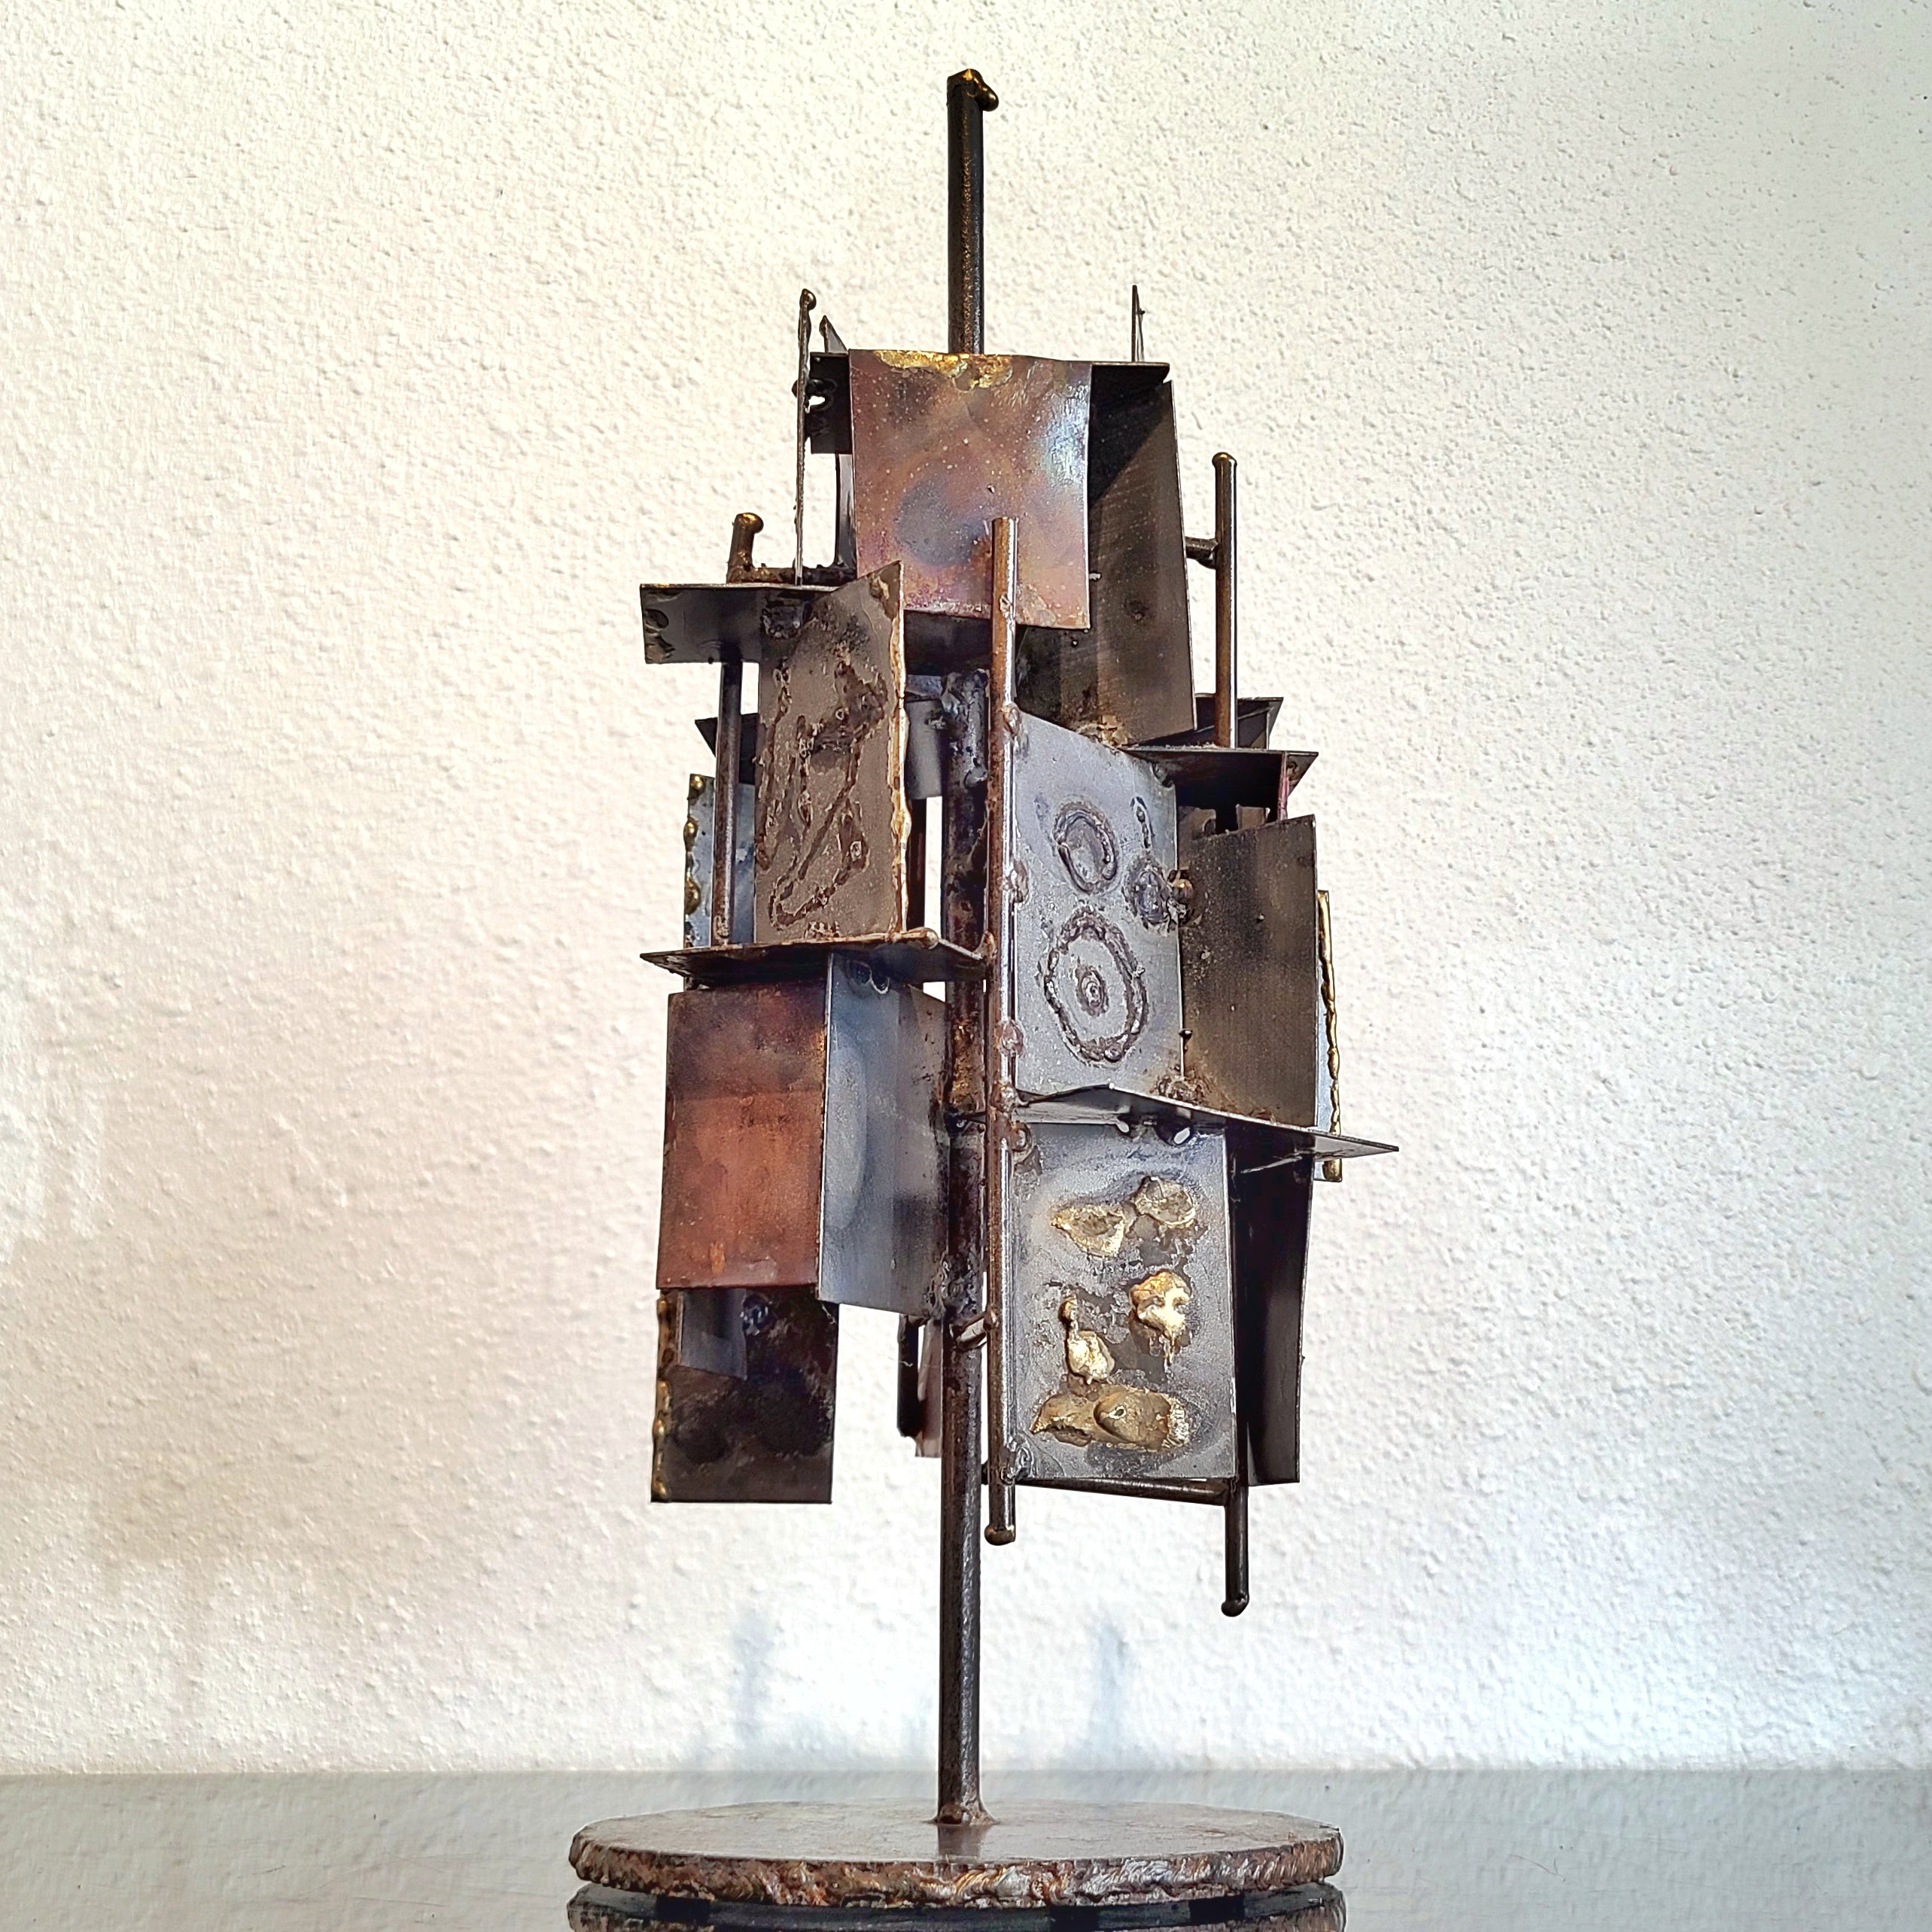 ABSTRACT BRUTALIST METAL TABLETOP SCULPTURE (SIGNED)